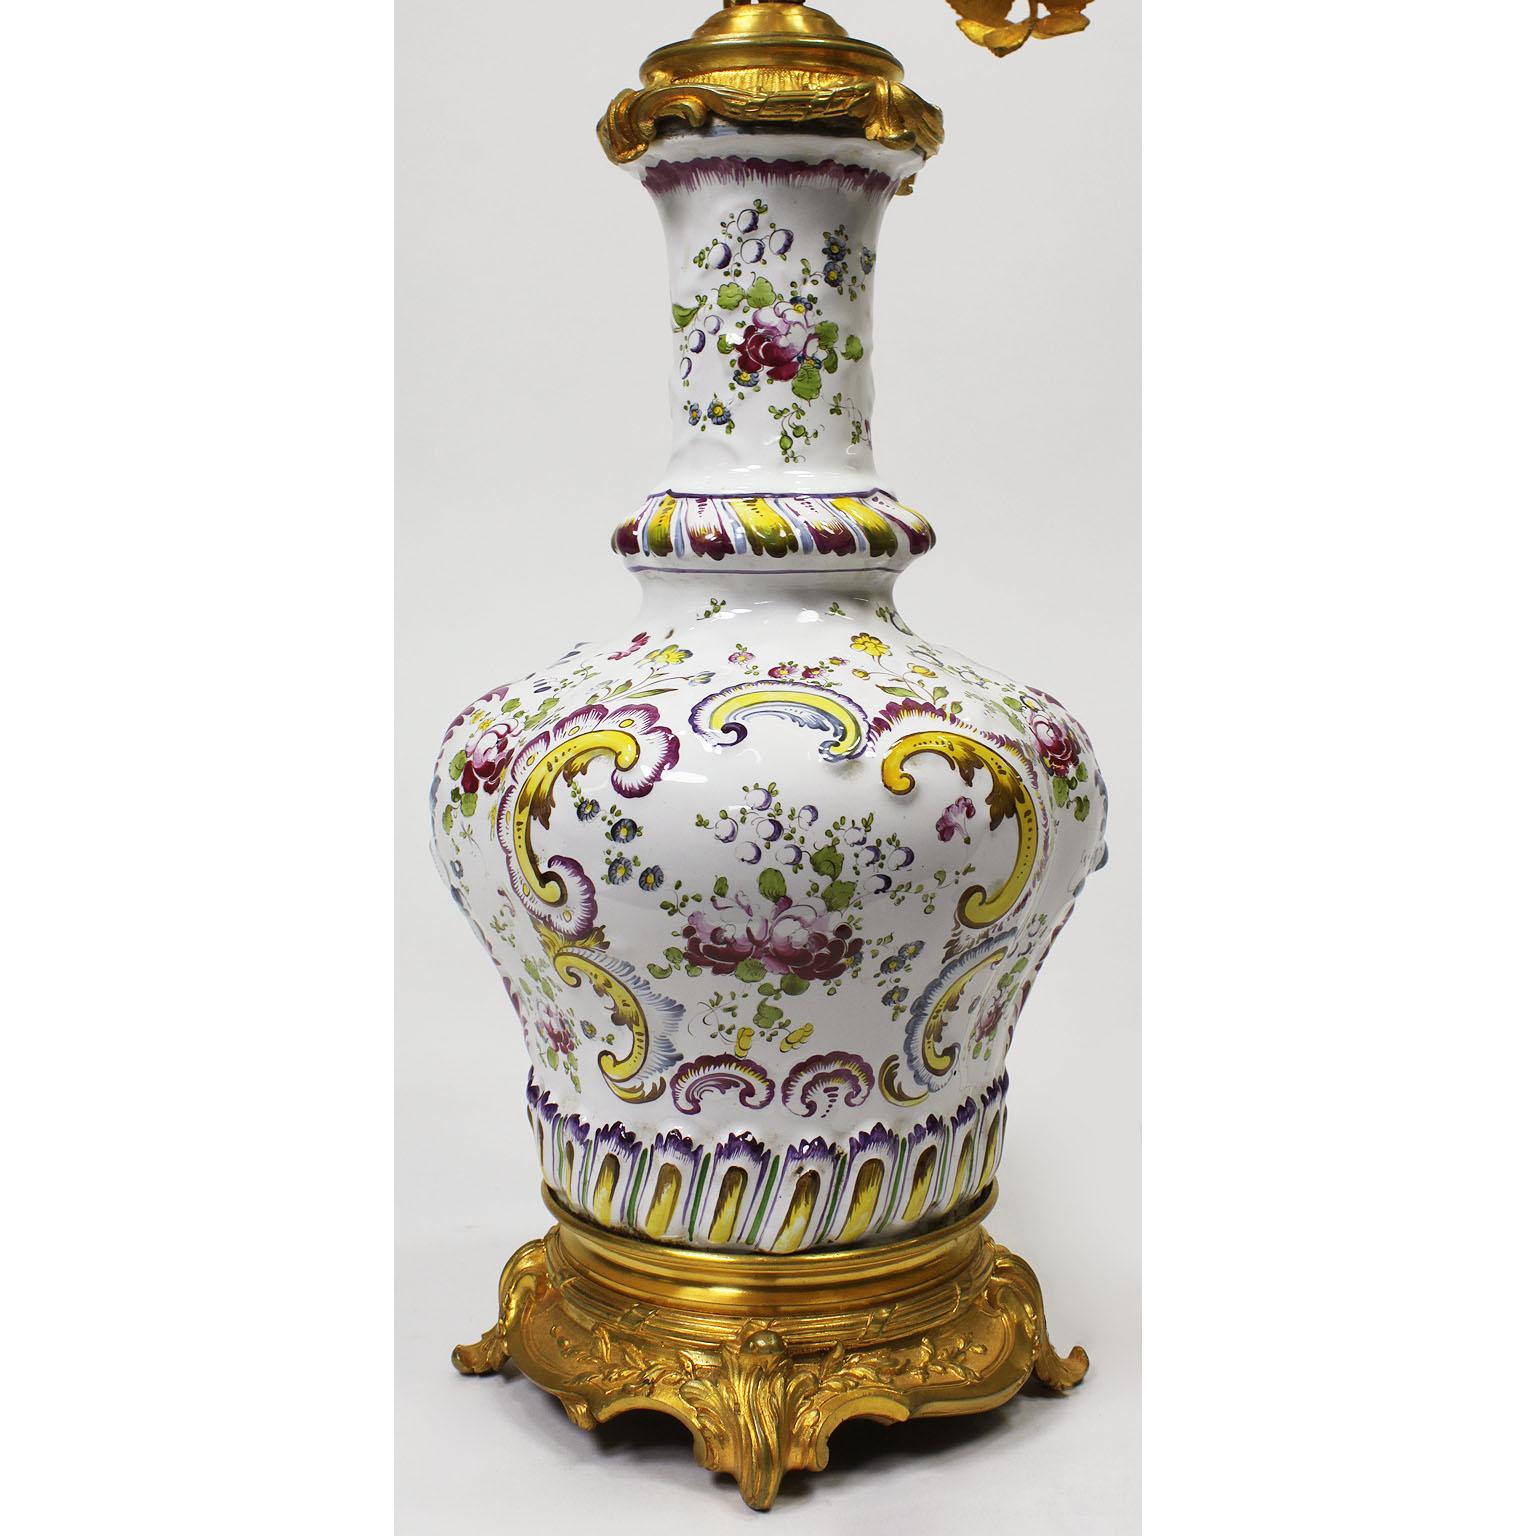 Hand-Painted Pair of 19th Century Gilt-Bronze & Faience Porcelain Table Lamp Candelabras For Sale